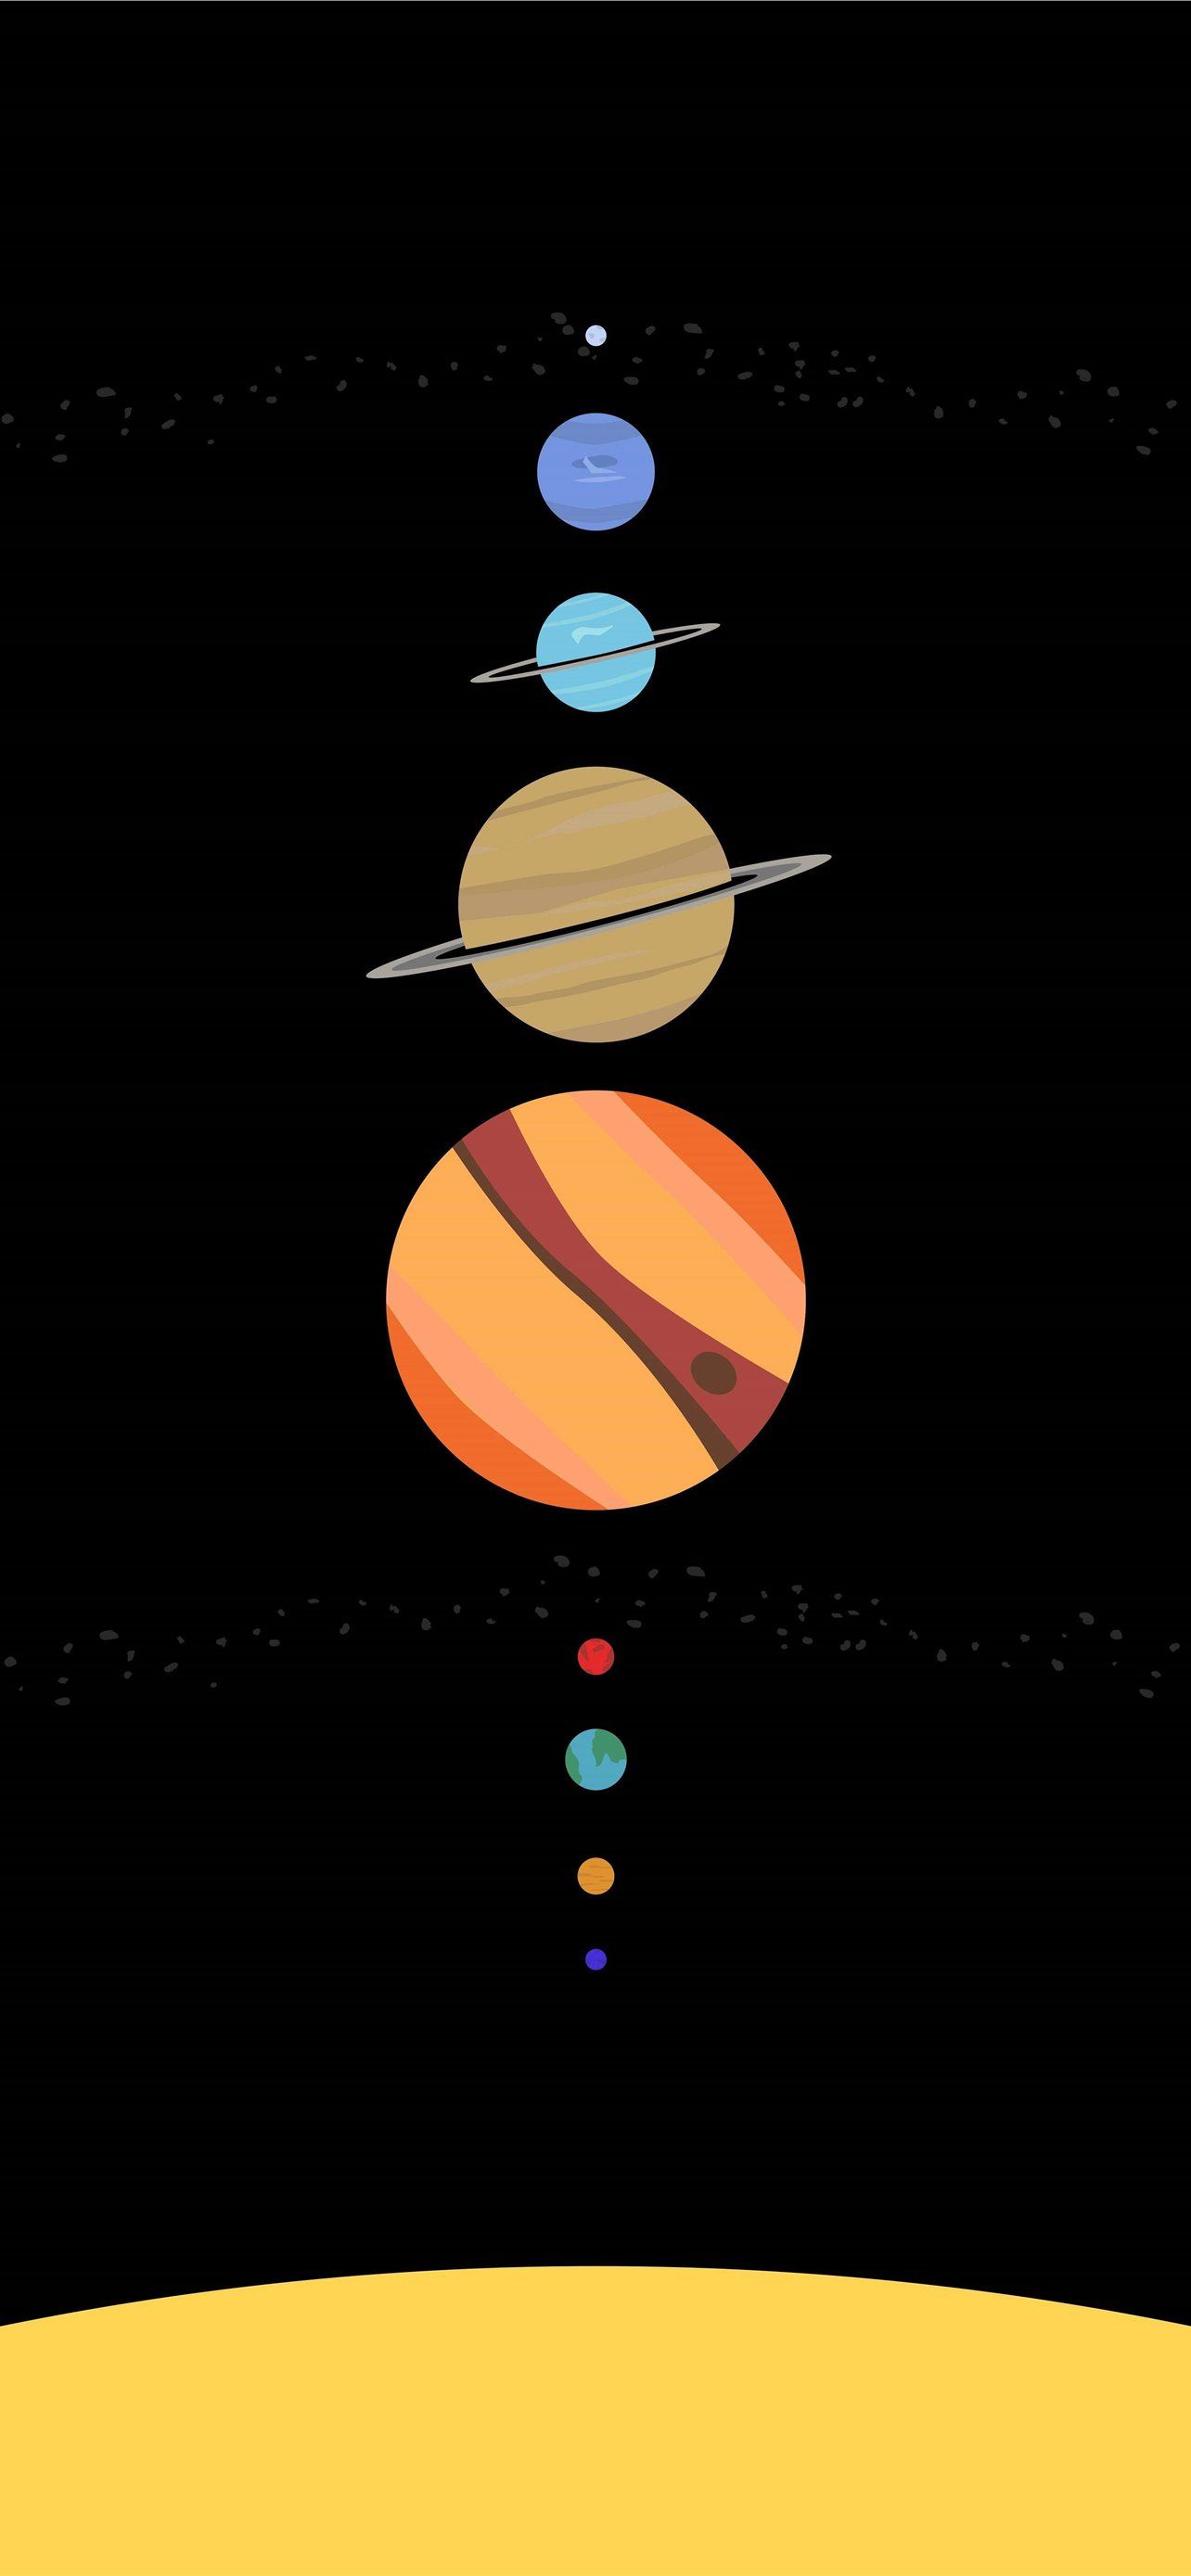 Solar System Minimalist Space iPhone Wallpaper Free Download